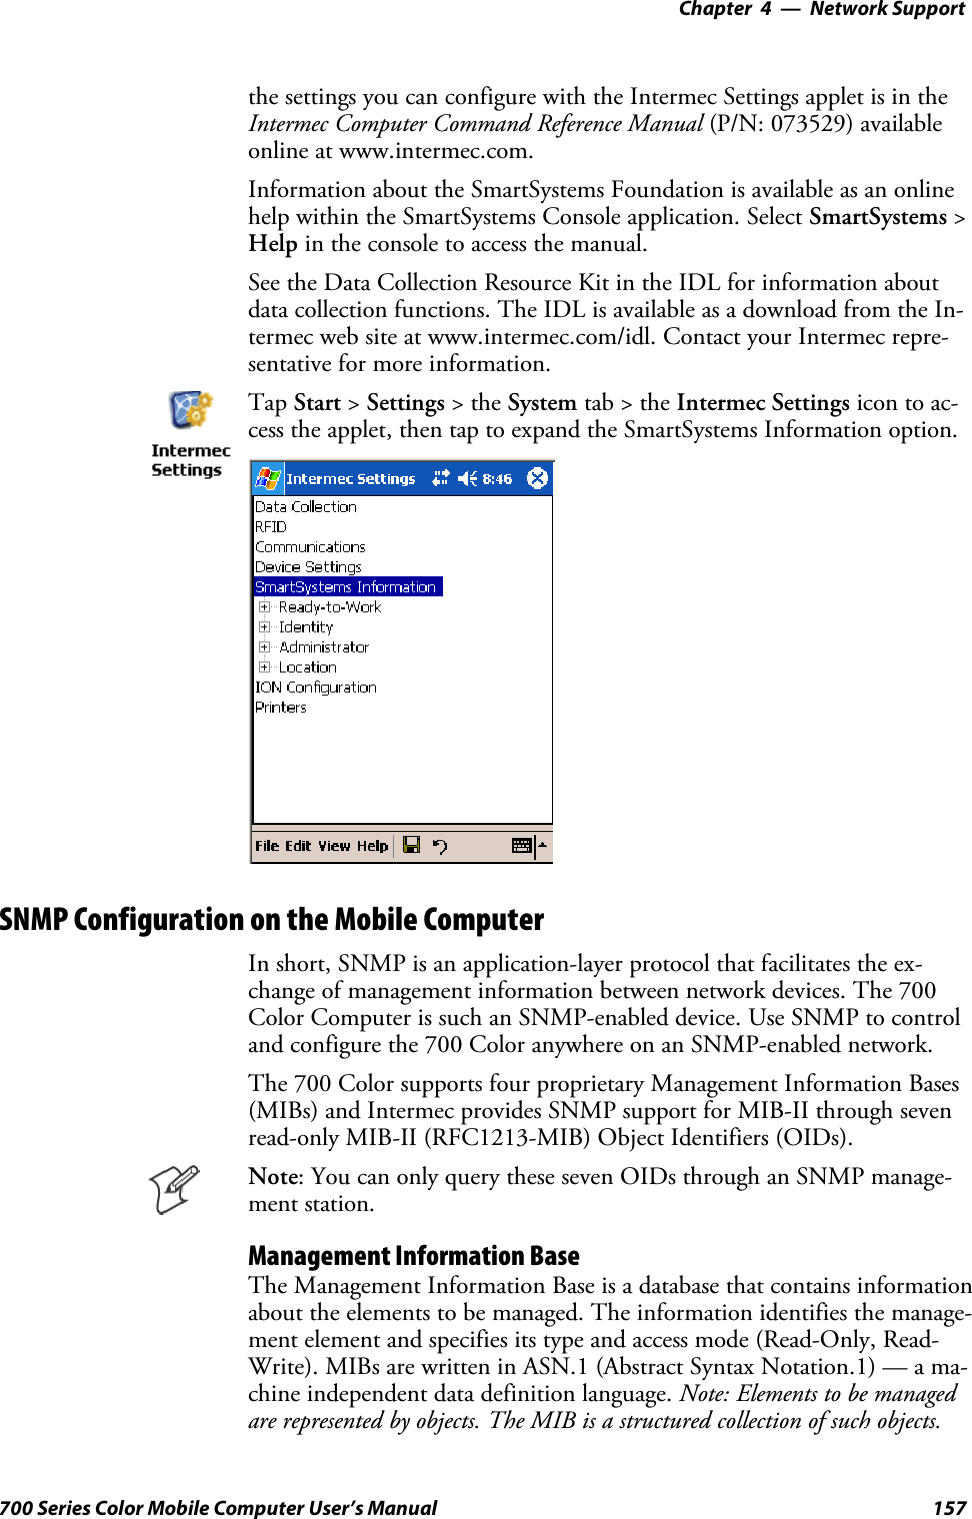 Network Support—Chapter 4157700 Series Color Mobile Computer User’s Manualthe settings you can configure with the Intermec Settings applet is in theIntermec Computer Command Reference Manual (P/N: 073529) availableonline at www.intermec.com.Information about the SmartSystems Foundation is available as an onlinehelp within the SmartSystems Console application. Select SmartSystems &gt;Help in the console to access the manual.See the Data Collection Resource Kit in the IDL for information aboutdata collection functions. The IDL is available as a download from the In-termec web site at www.intermec.com/idl. Contact your Intermec repre-sentative for more information.Tap Start &gt;Settings &gt;theSystem tab&gt;theIntermec Settings icon to ac-cess the applet, then tap to expand the SmartSystems Information option.SNMP Configuration on the Mobile ComputerIn short, SNMP is an application-layer protocol that facilitates the ex-change of management information between network devices. The 700Color Computer is such an SNMP-enabled device. Use SNMP to controland configure the 700 Color anywhere on an SNMP-enabled network.The 700 Color supports four proprietary Management Information Bases(MIBs) and Intermec provides SNMP support for MIB-II through sevenread-only MIB-II (RFC1213-MIB) Object Identifiers (OIDs).Note: You can only query these seven OIDs through an SNMP manage-ment station.Management Information BaseThe Management Information Base is a database that contains informationabout the elements to be managed. The information identifies the manage-ment element and specifies its type and access mode (Read-Only, Read-Write). MIBs are written in ASN.1 (Abstract Syntax Notation.1) — a ma-chine independent data definition language. Note: Elements to be managedare represented by objects. The MIB is a structured collection of such objects.